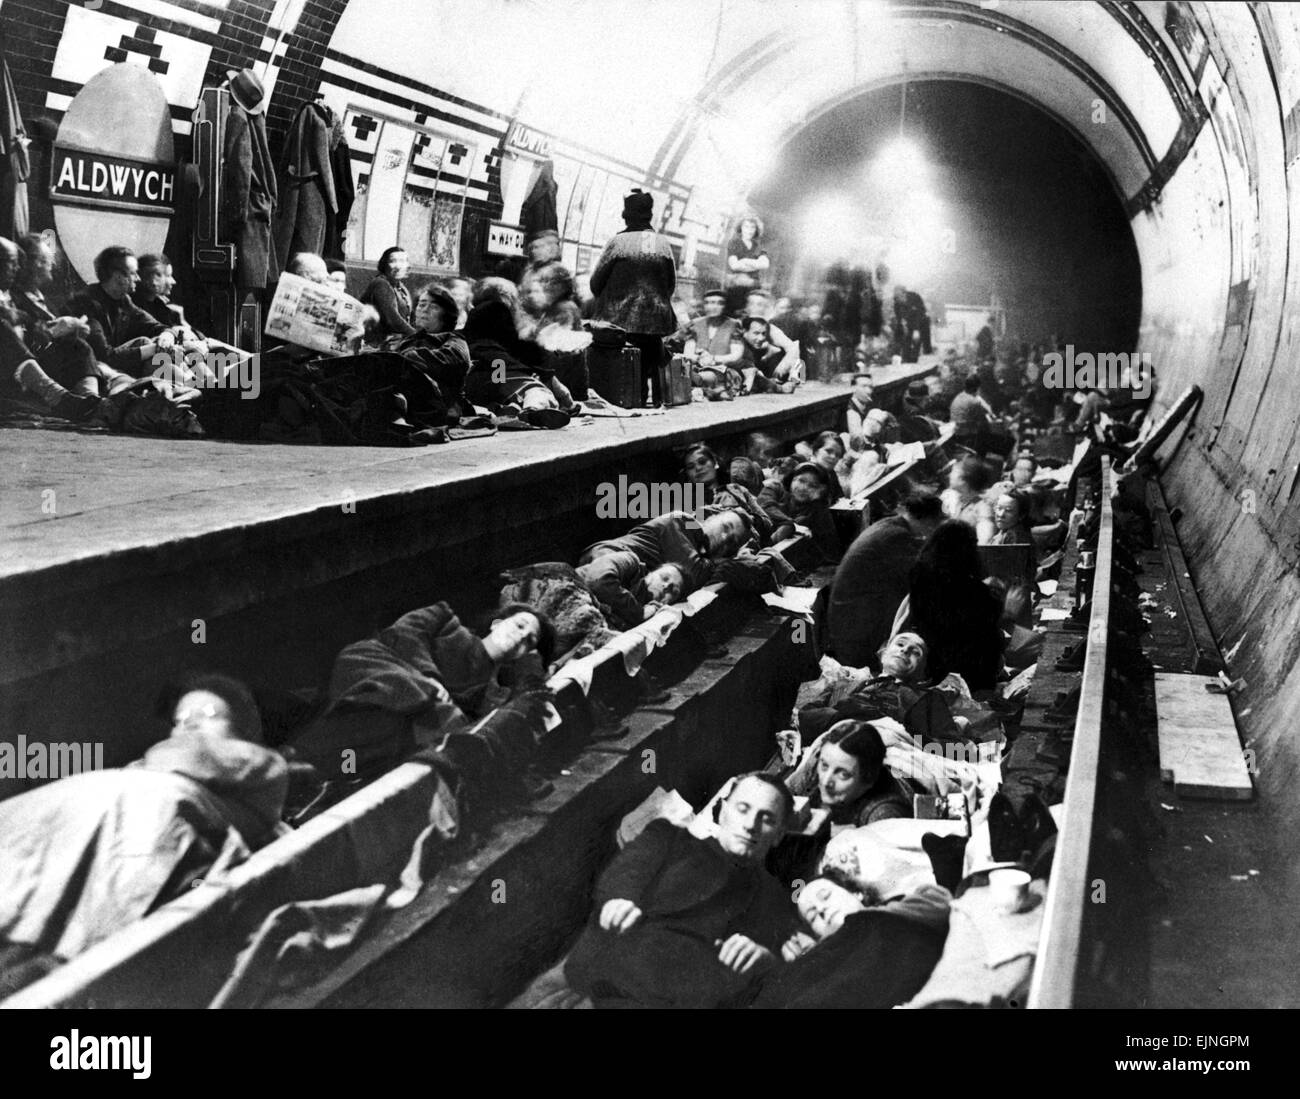 Londoners use Aldwych Underground Station as an air raid shelter during bomb attacks on London during WW2 Circa 1941. Stock Photo